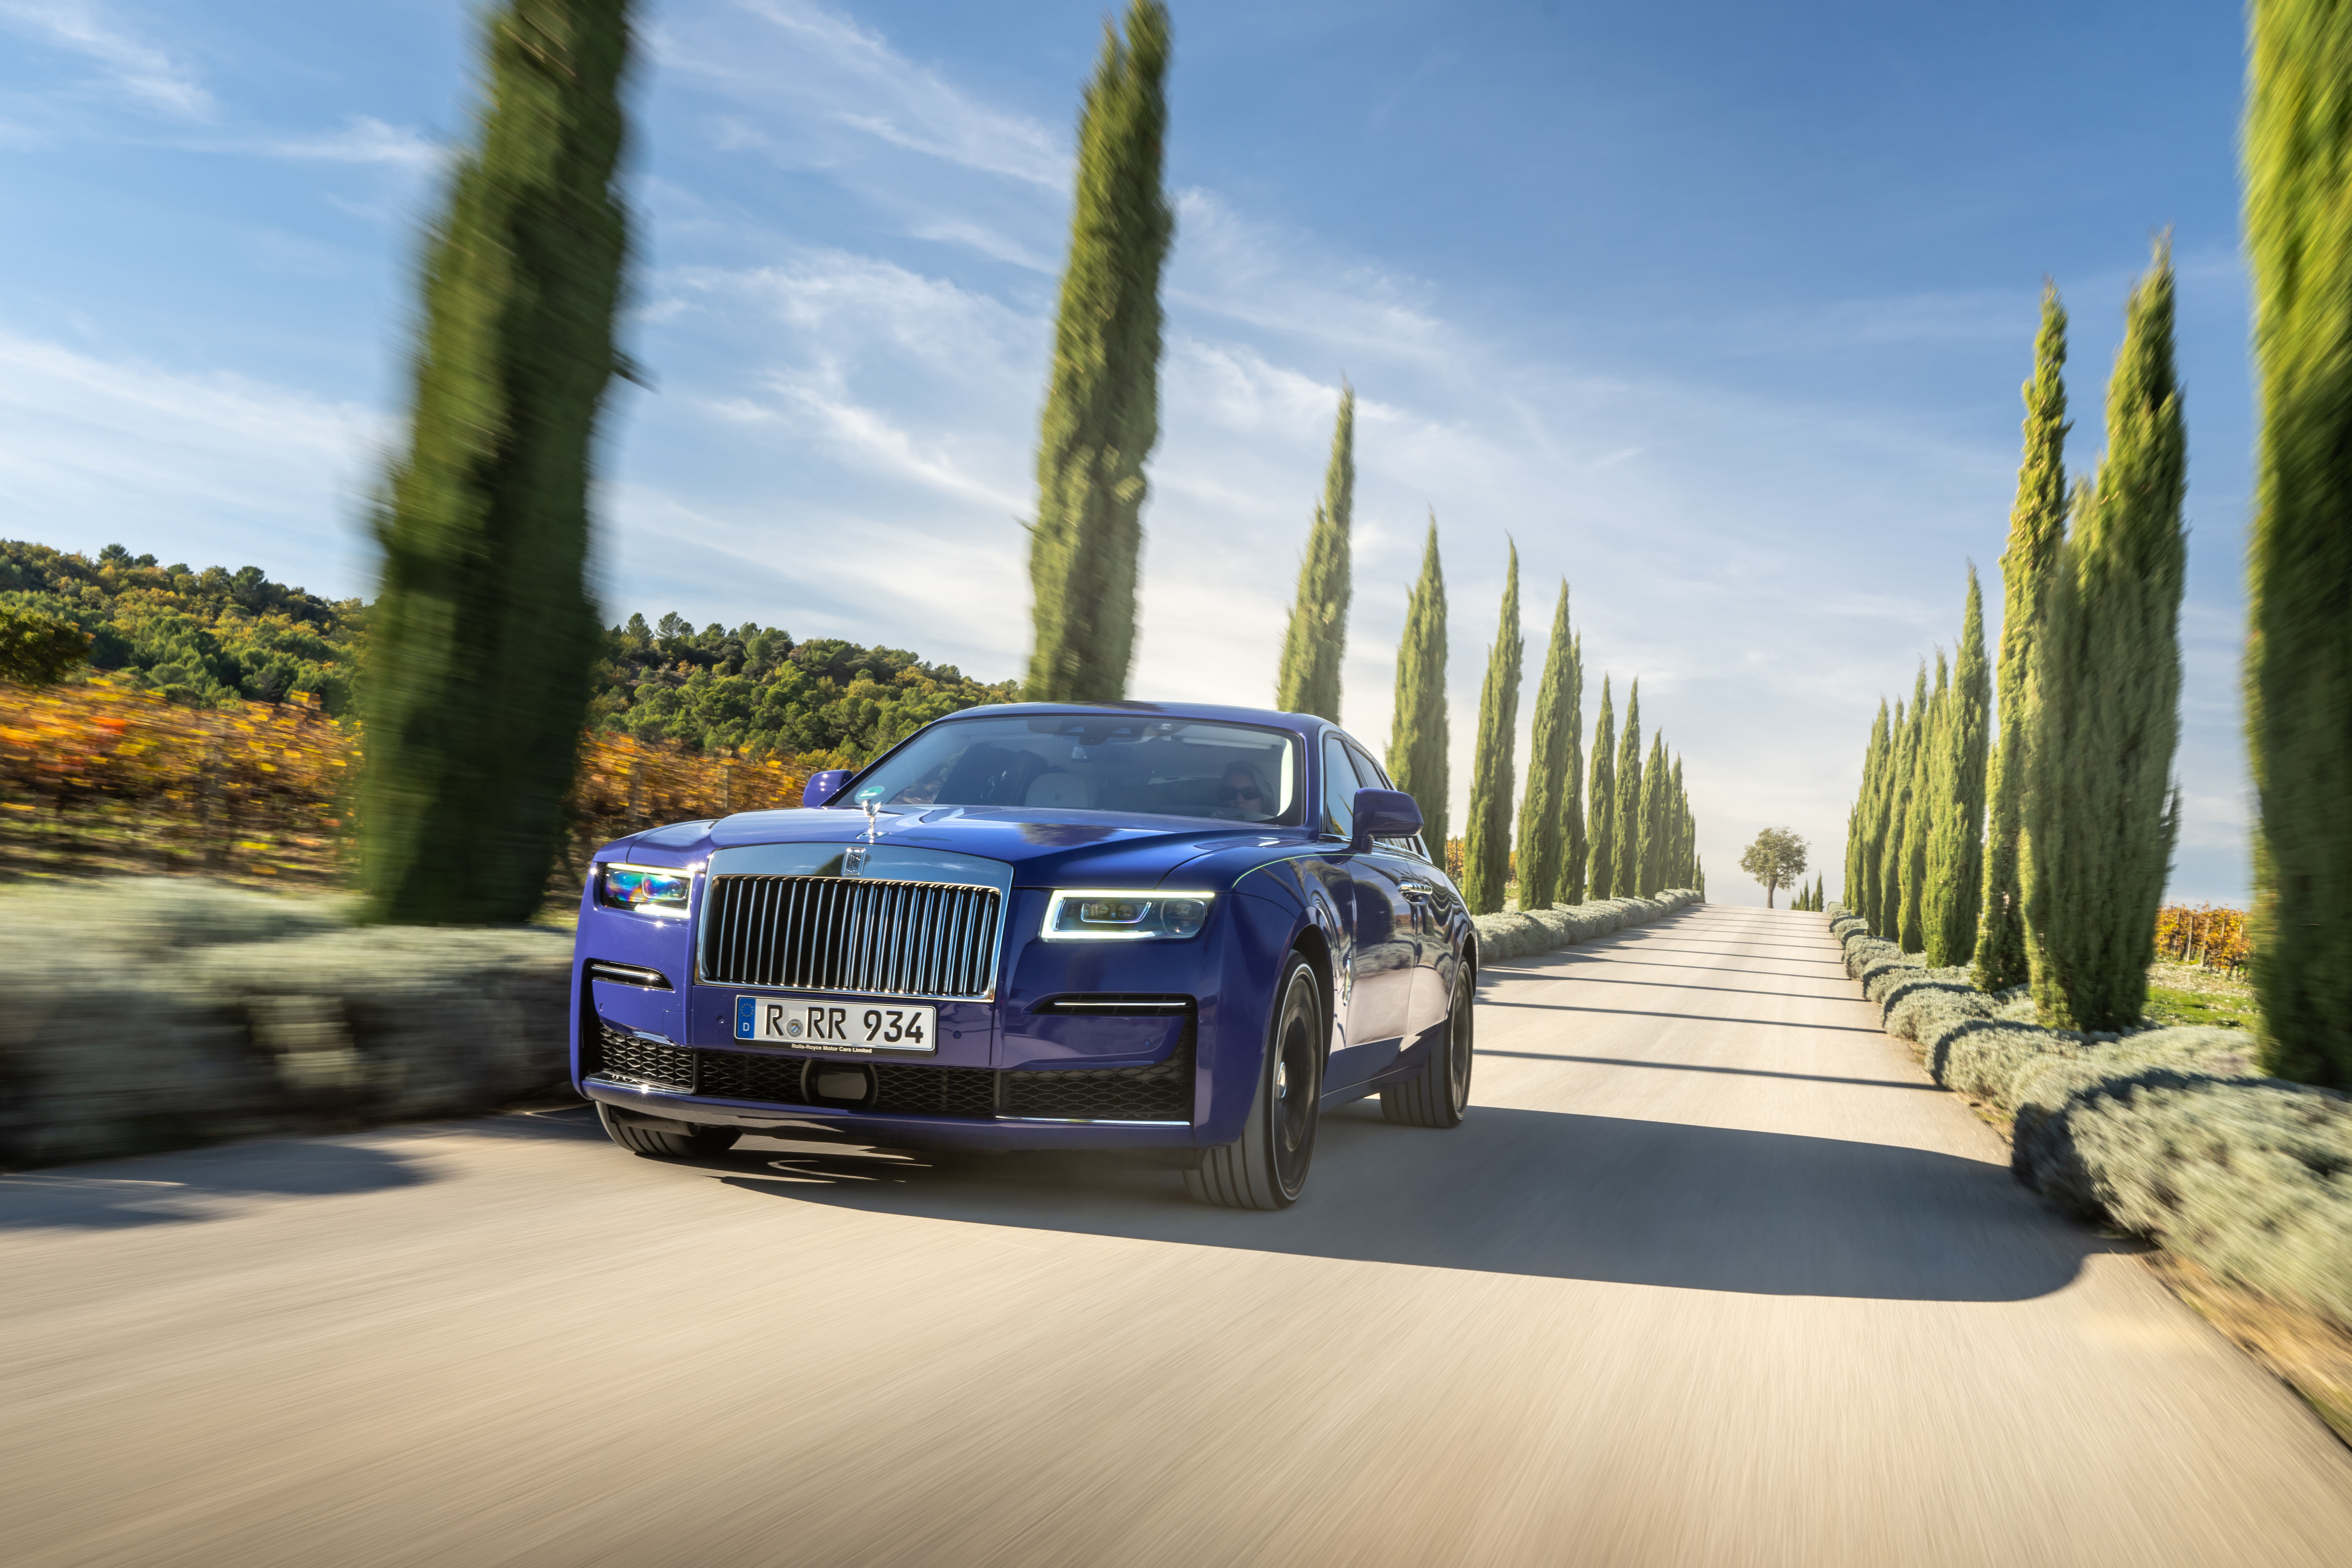 New Rolls-Royce available in Houston, TX at Post Oak Motor Cars